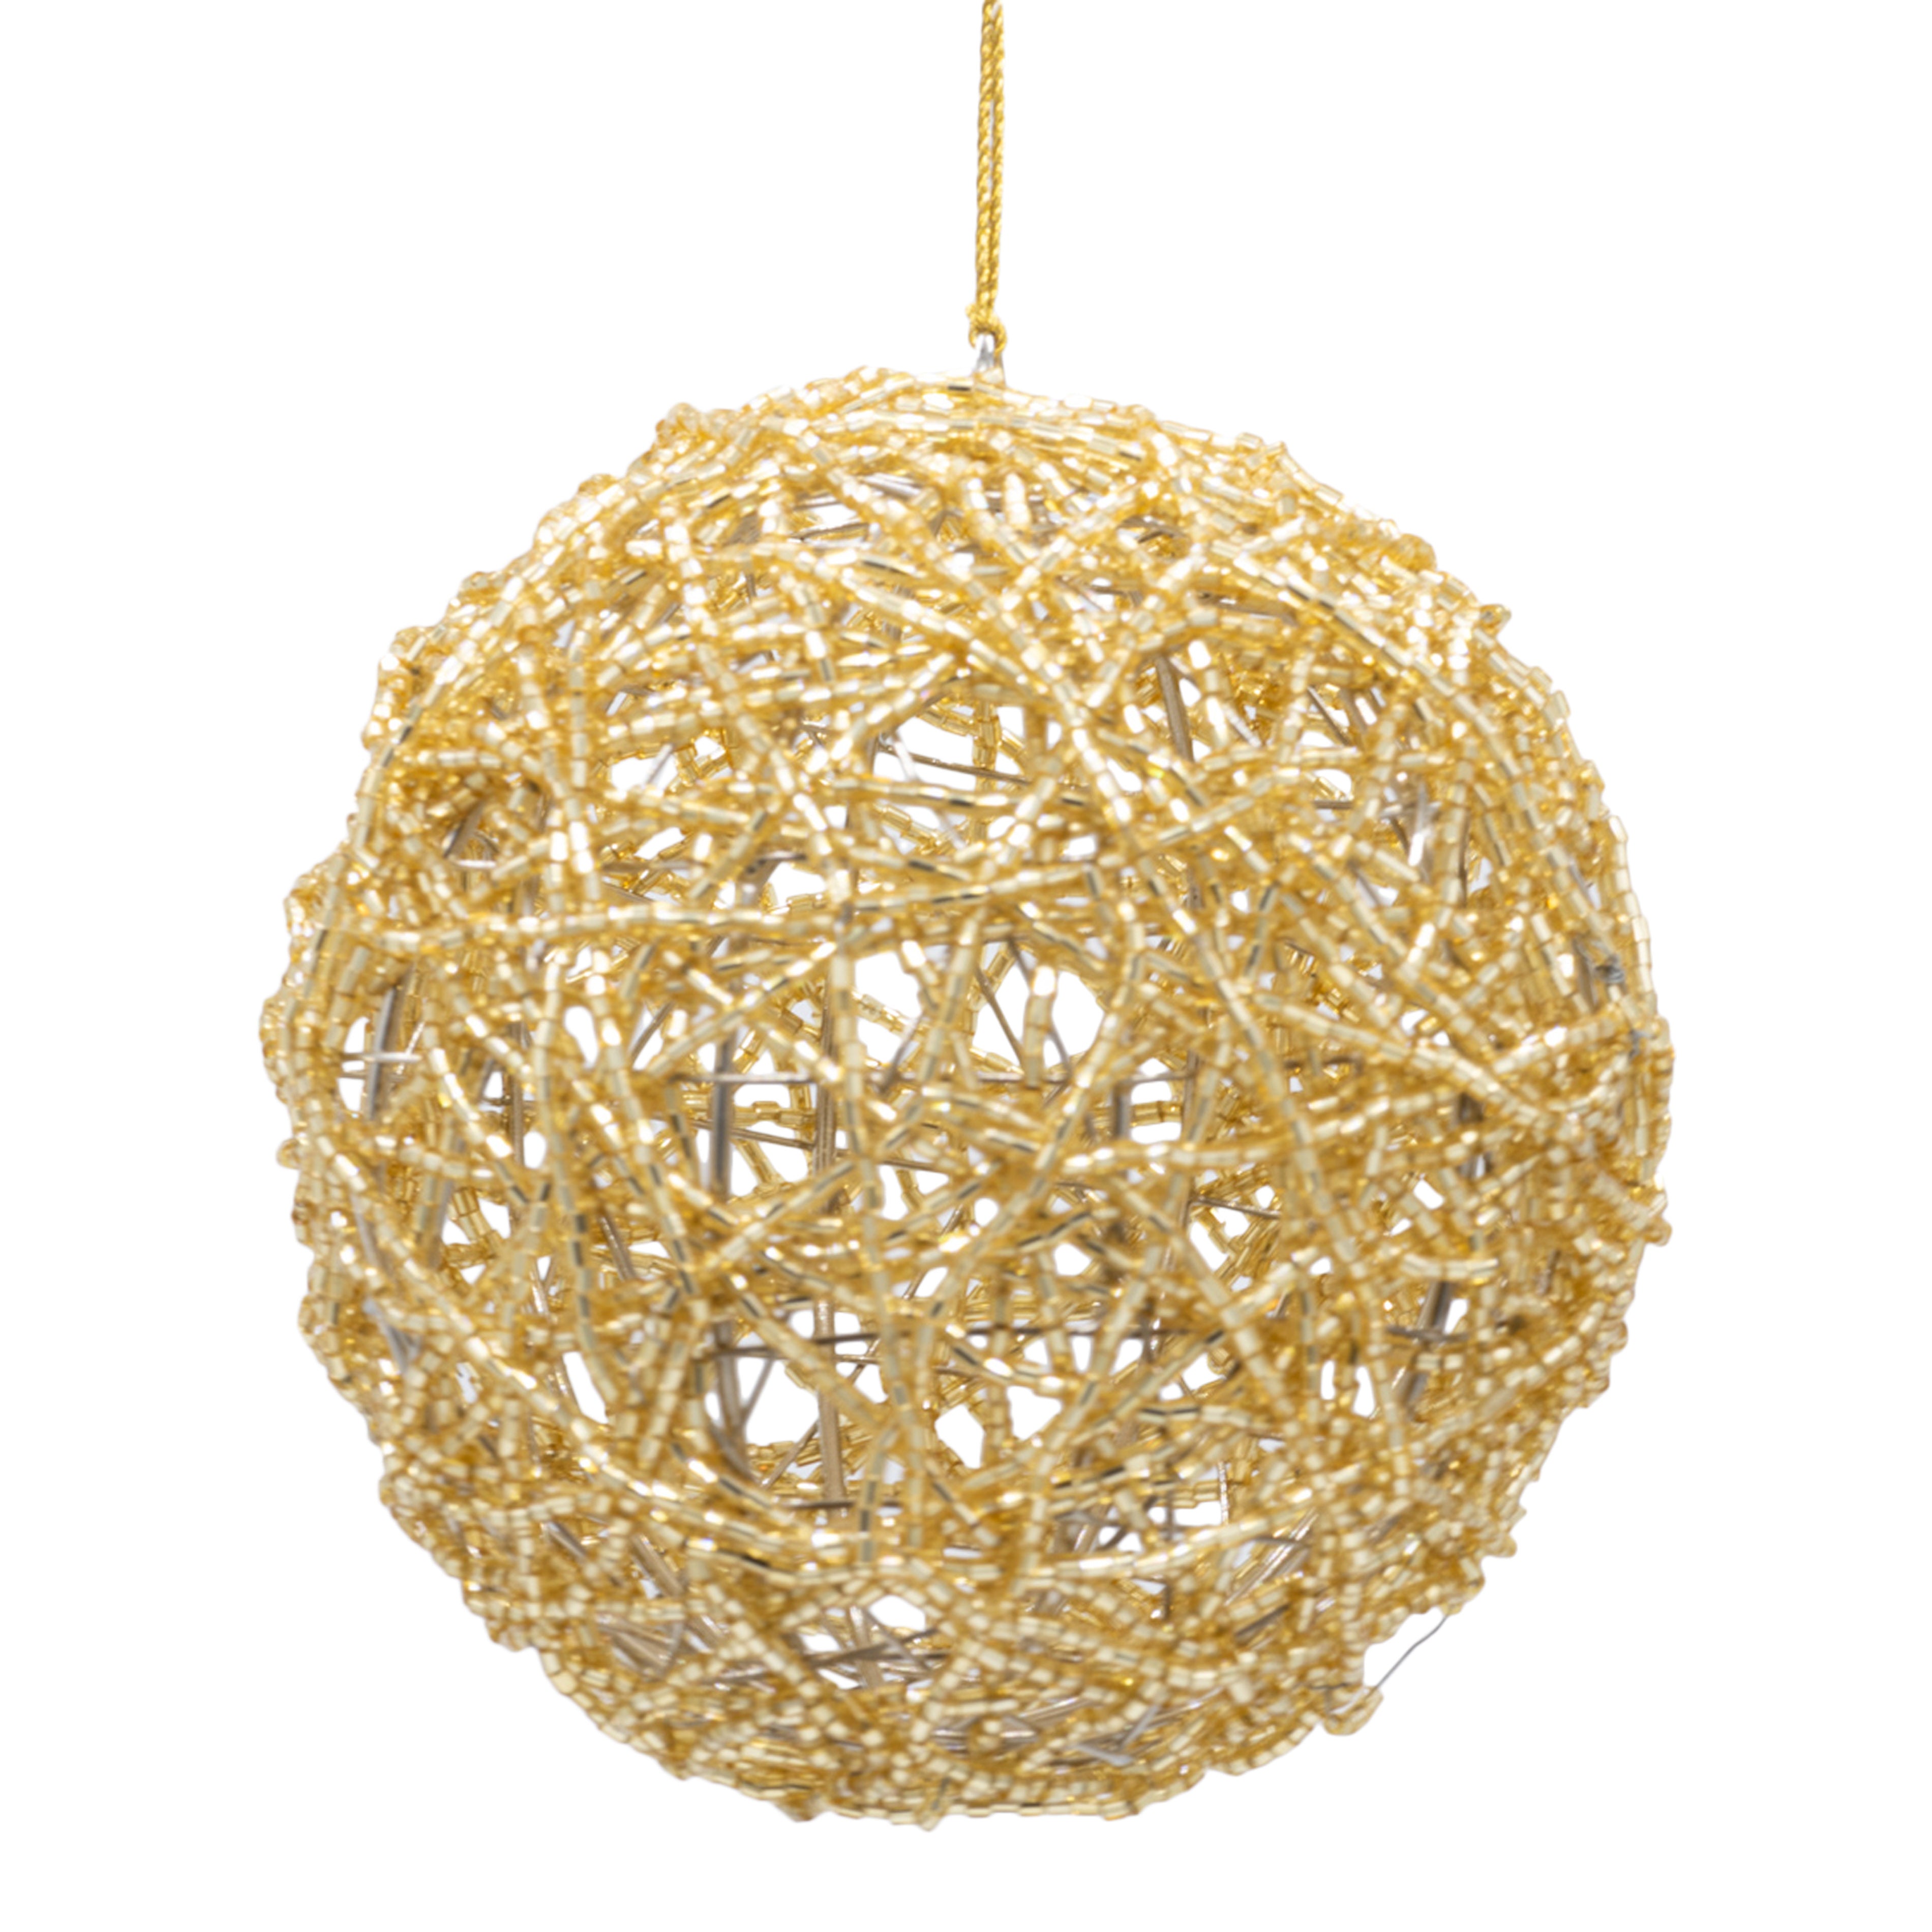 Gold beaded bauble on a white background